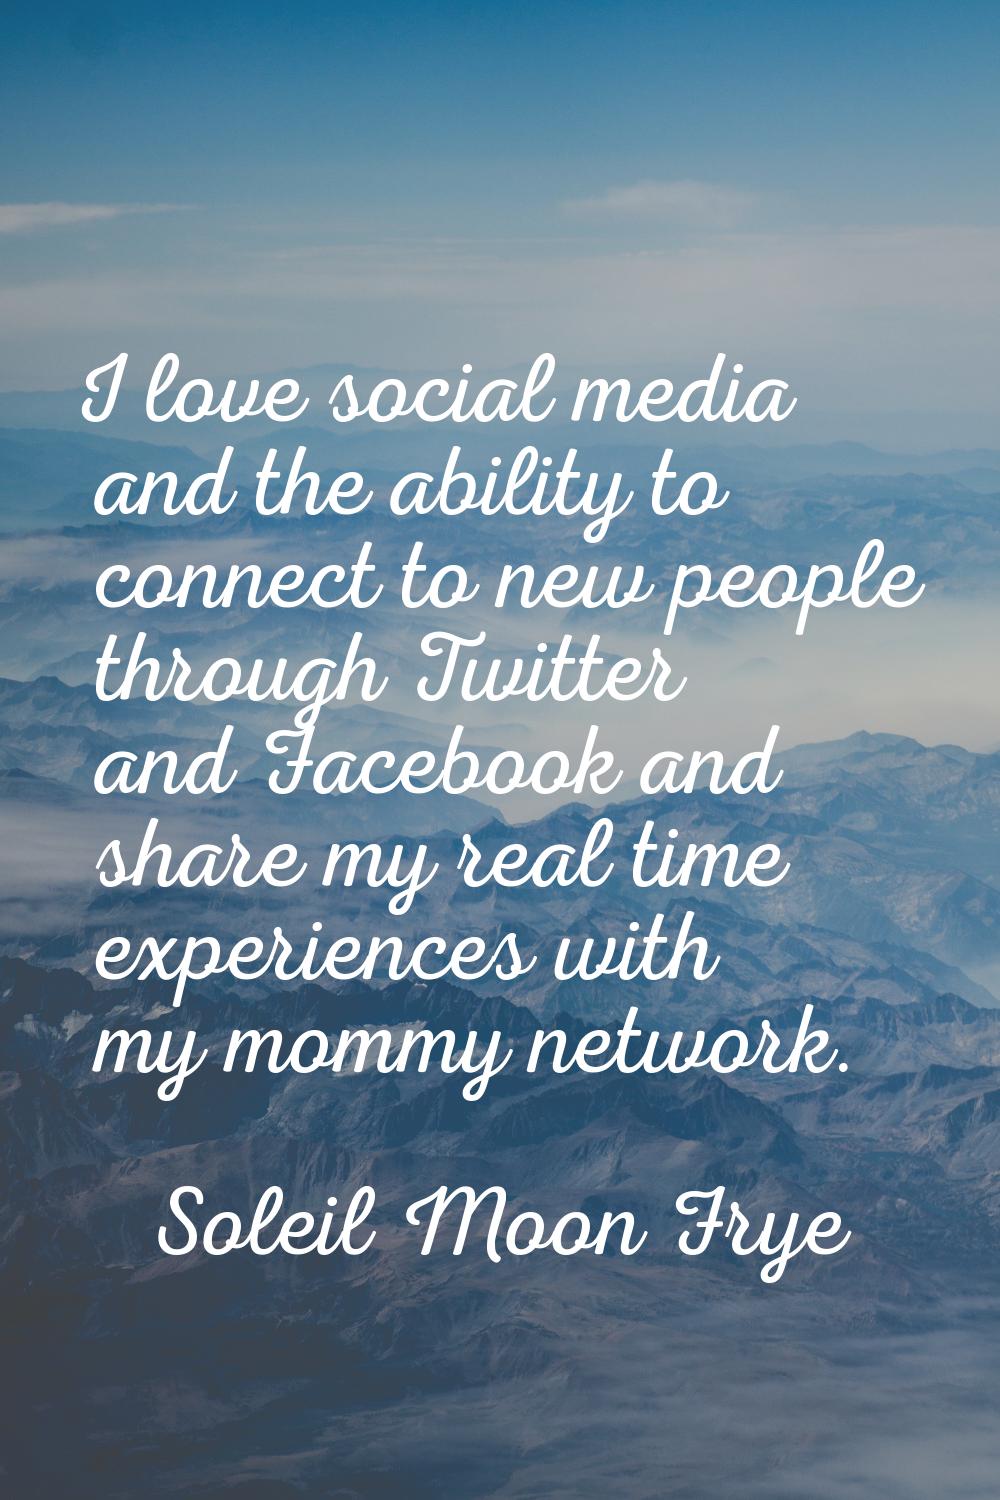 I love social media and the ability to connect to new people through Twitter and Facebook and share